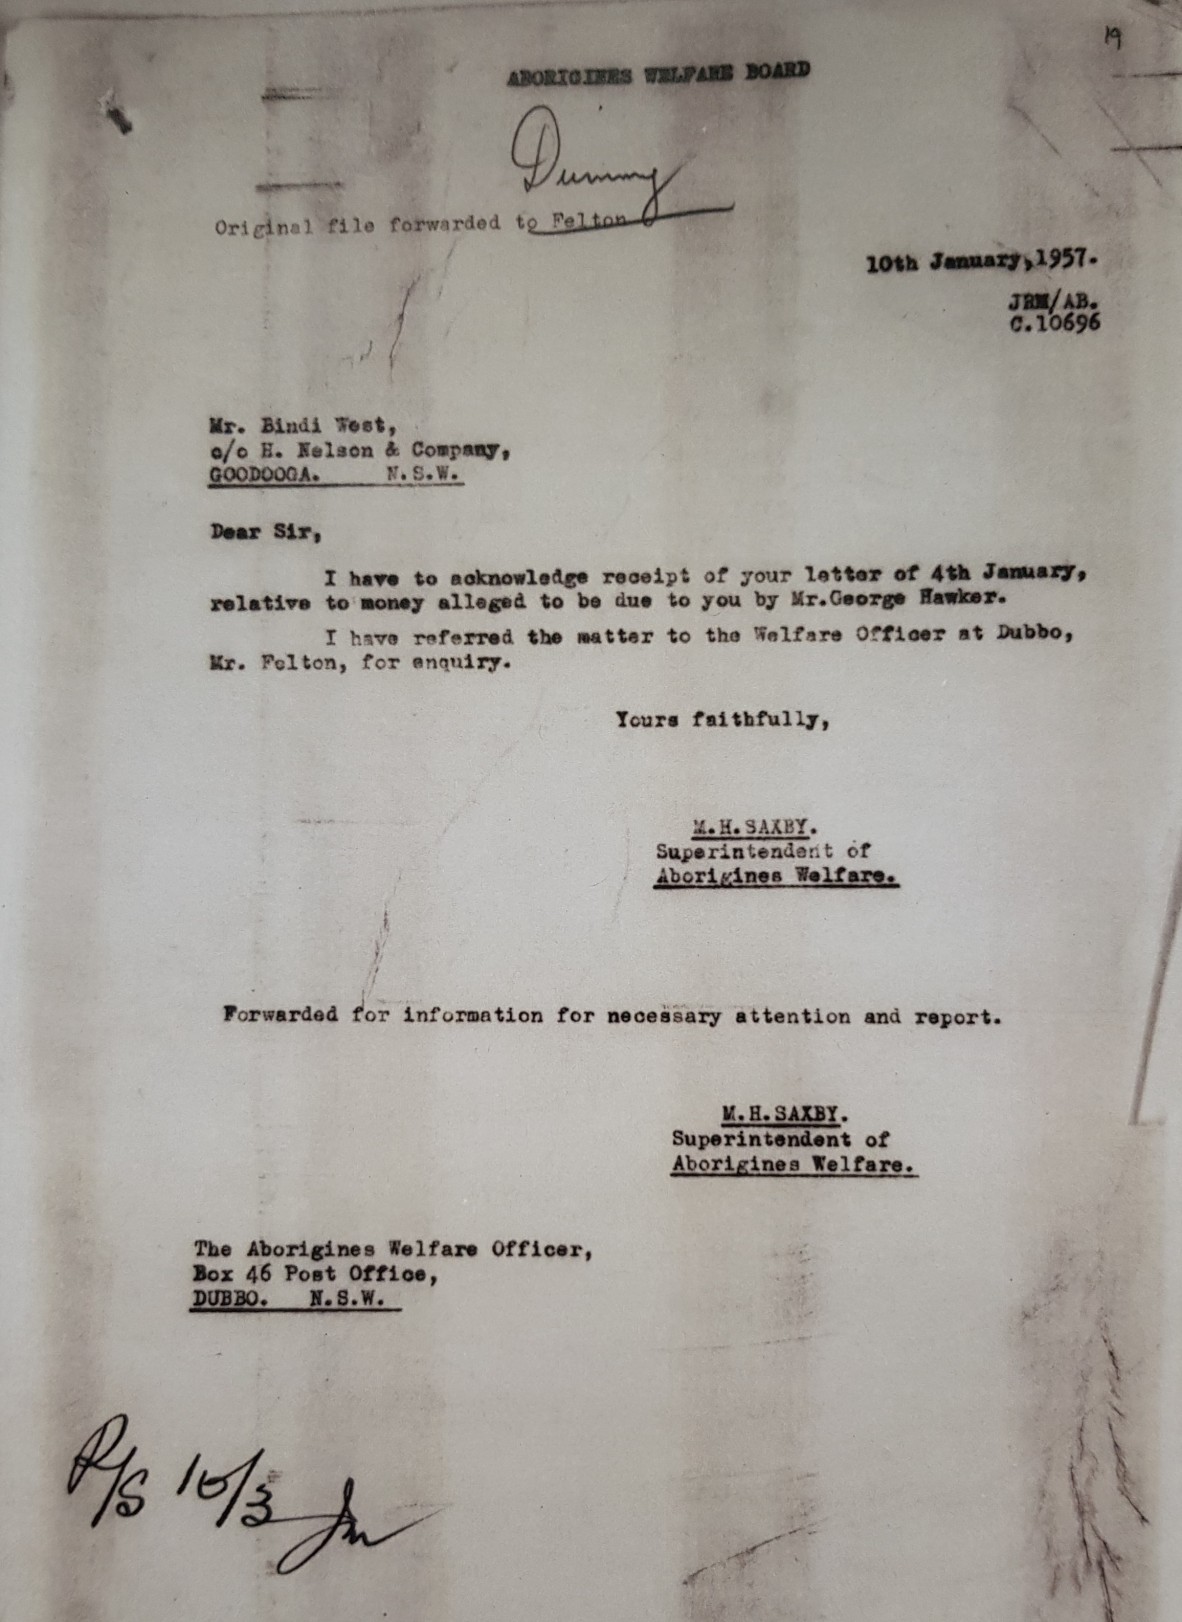 Acknowledgement of receipt of Bindi’s letter by Superintendent of Aborigines Welfare, M. H. Saxby on 10th Jan 1957. Advice that the matter was being referred to The Aborigines Welfare Officer (AWO) at Dubbo, Mr P. E. Felton.